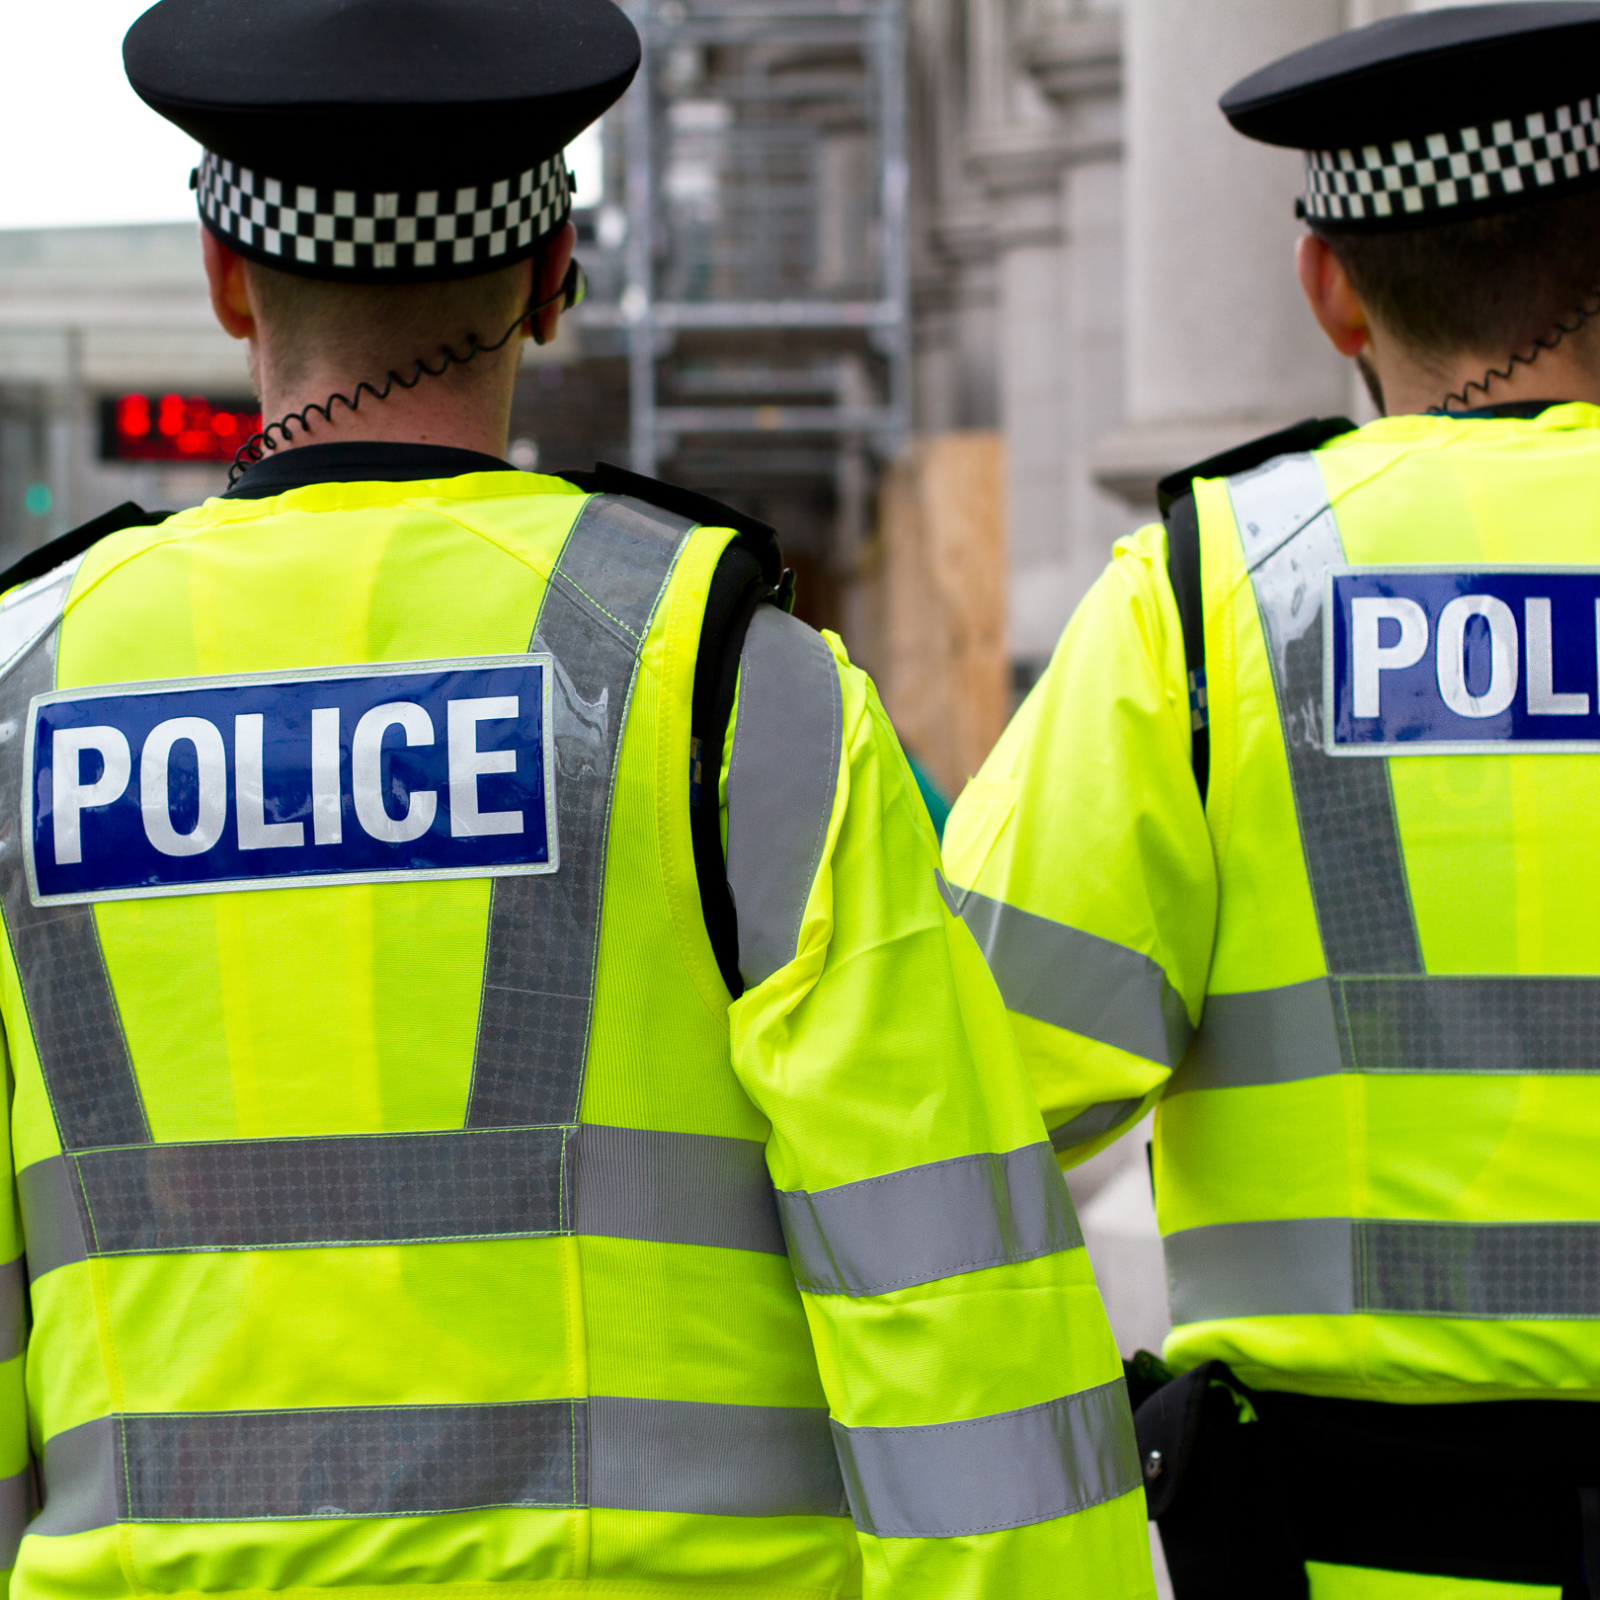 UK Police Top up Budget With Proceeds From Sale of Seized BTC